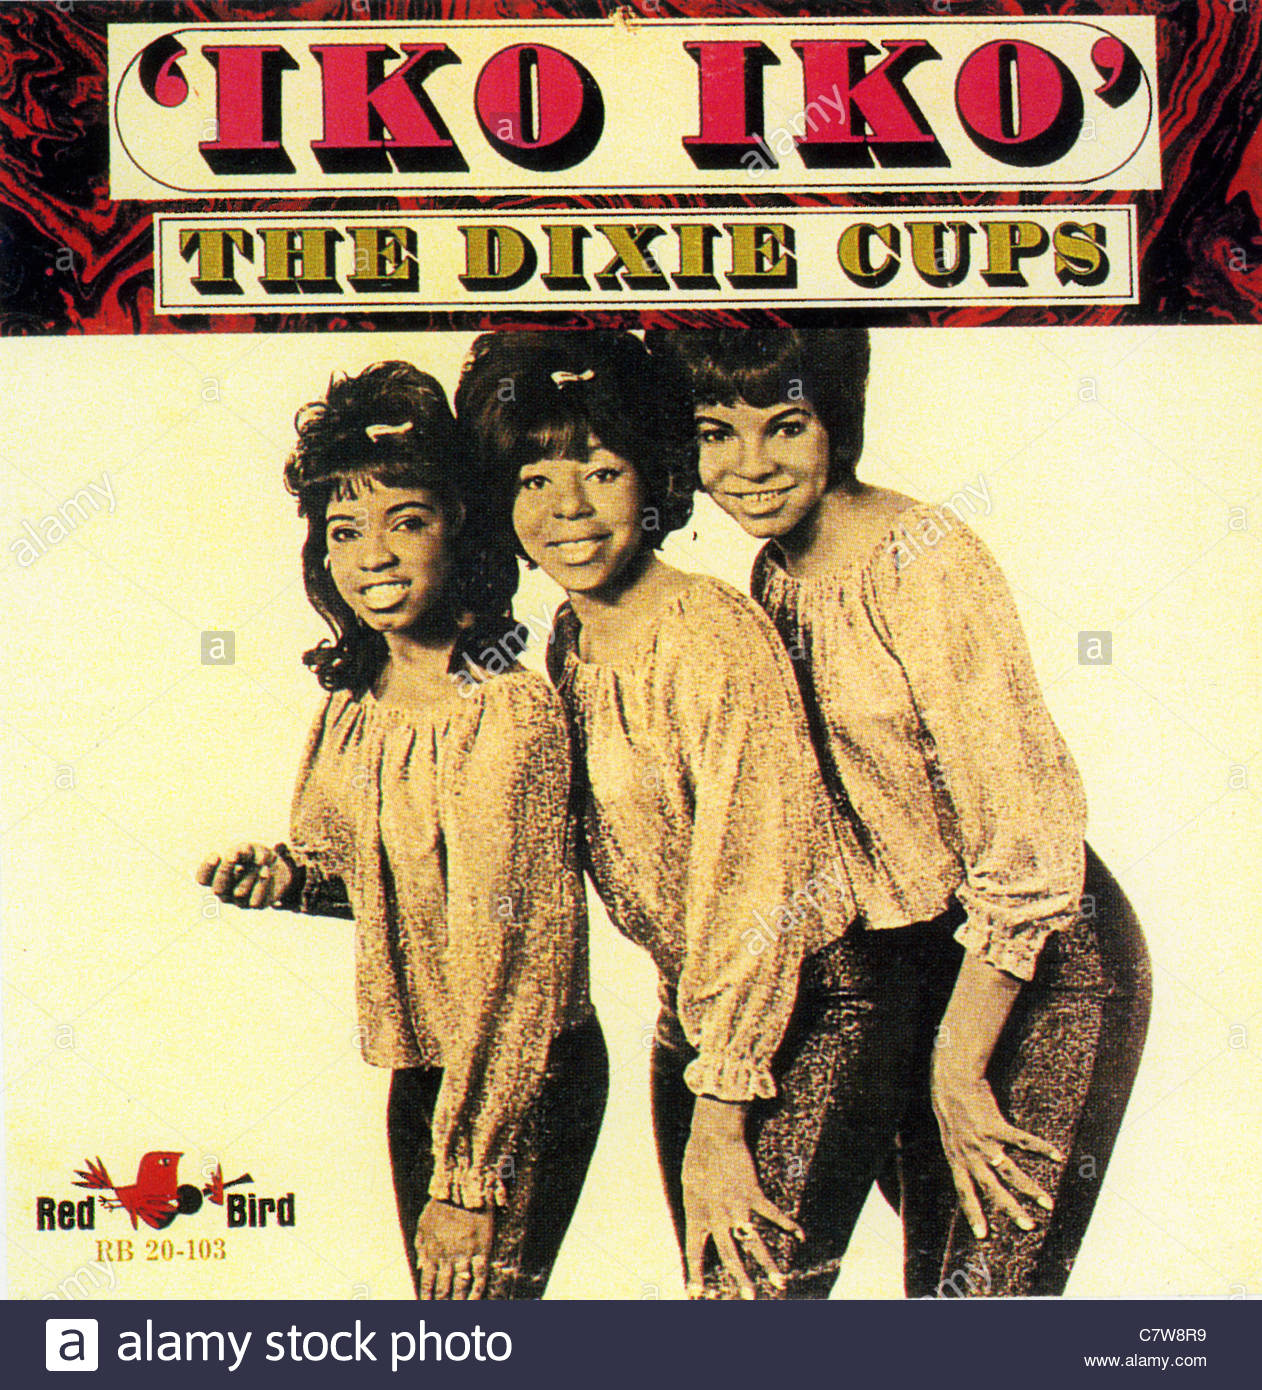 Art for Iko Iko by The Dixie Cups